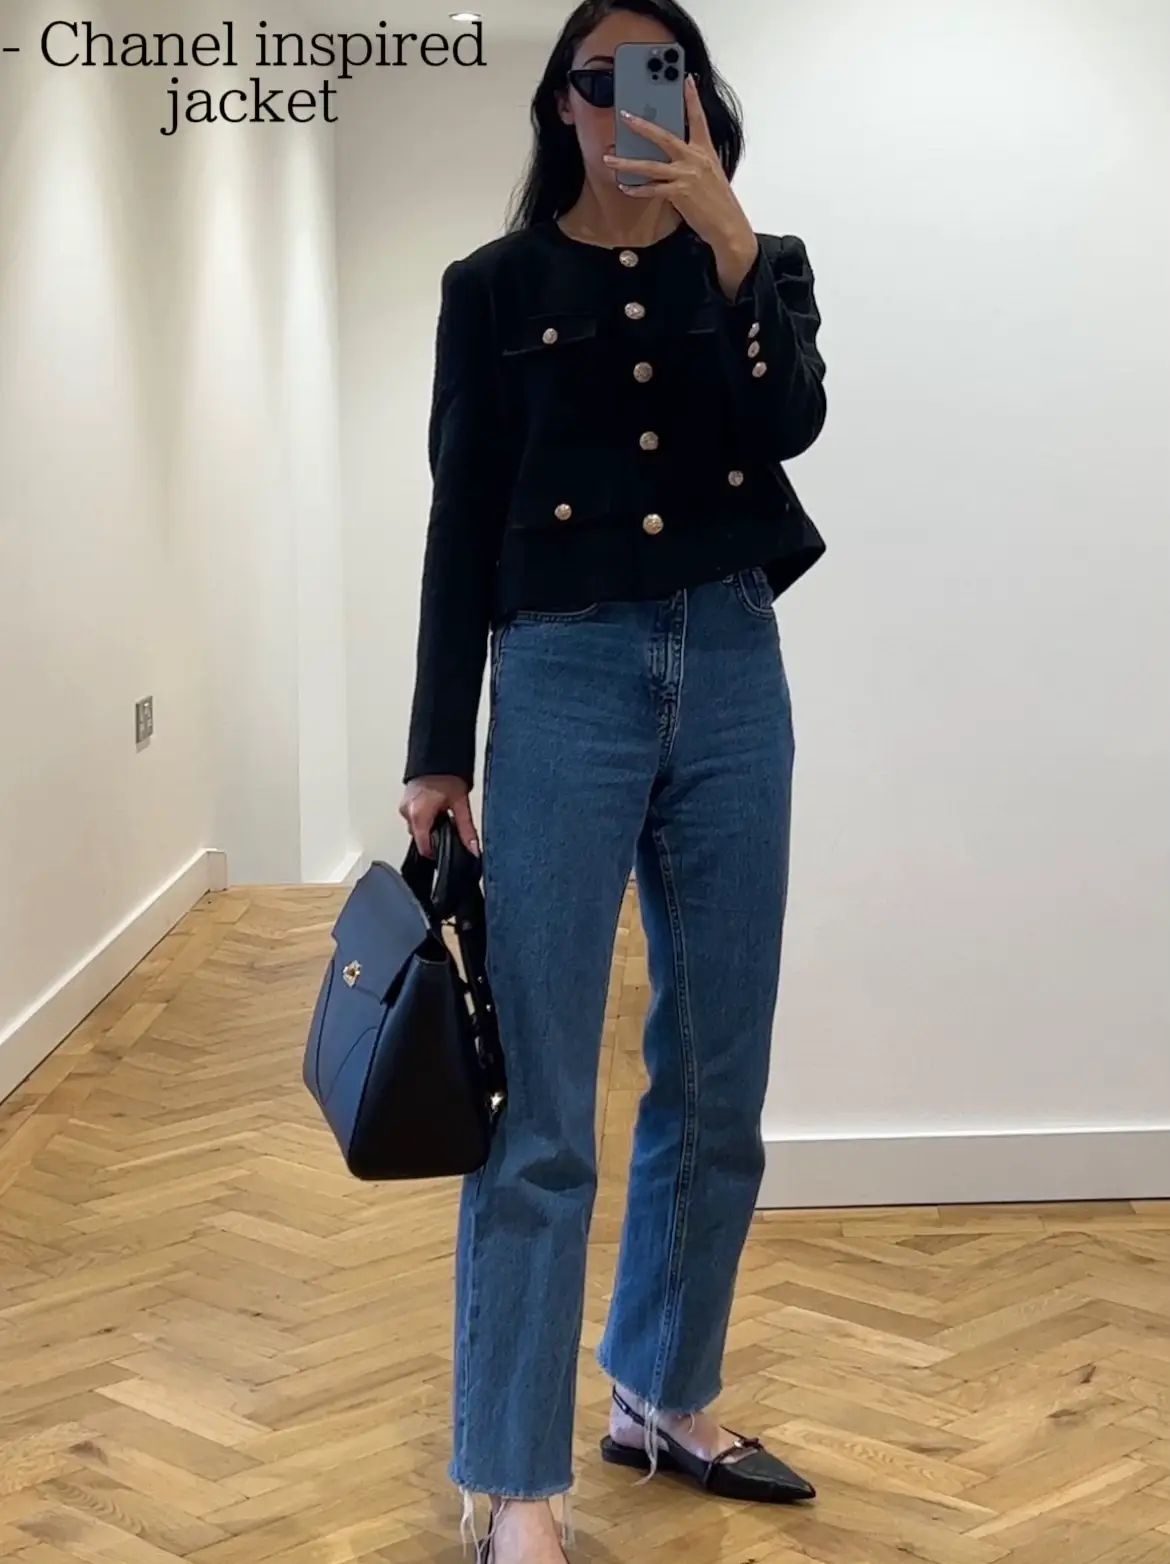 5 Outfit Ideas with Chanel-Inspired Blazer  Work outfit inspiration, Work  outfit, Fashion